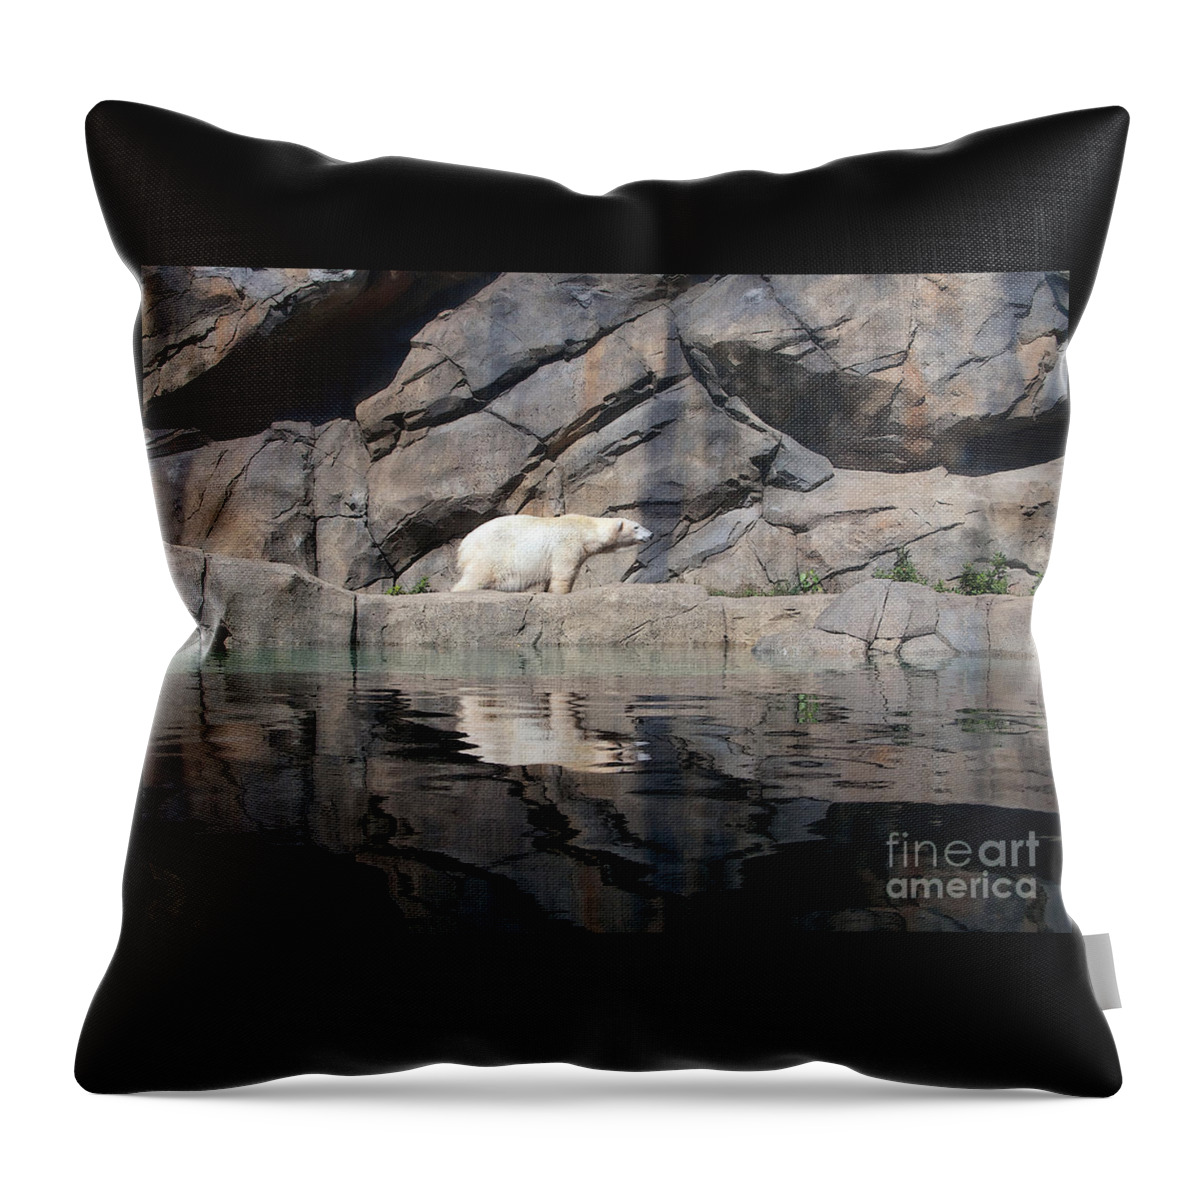 Chicagoland Throw Pillow featuring the photograph Not My Home by Ann Horn